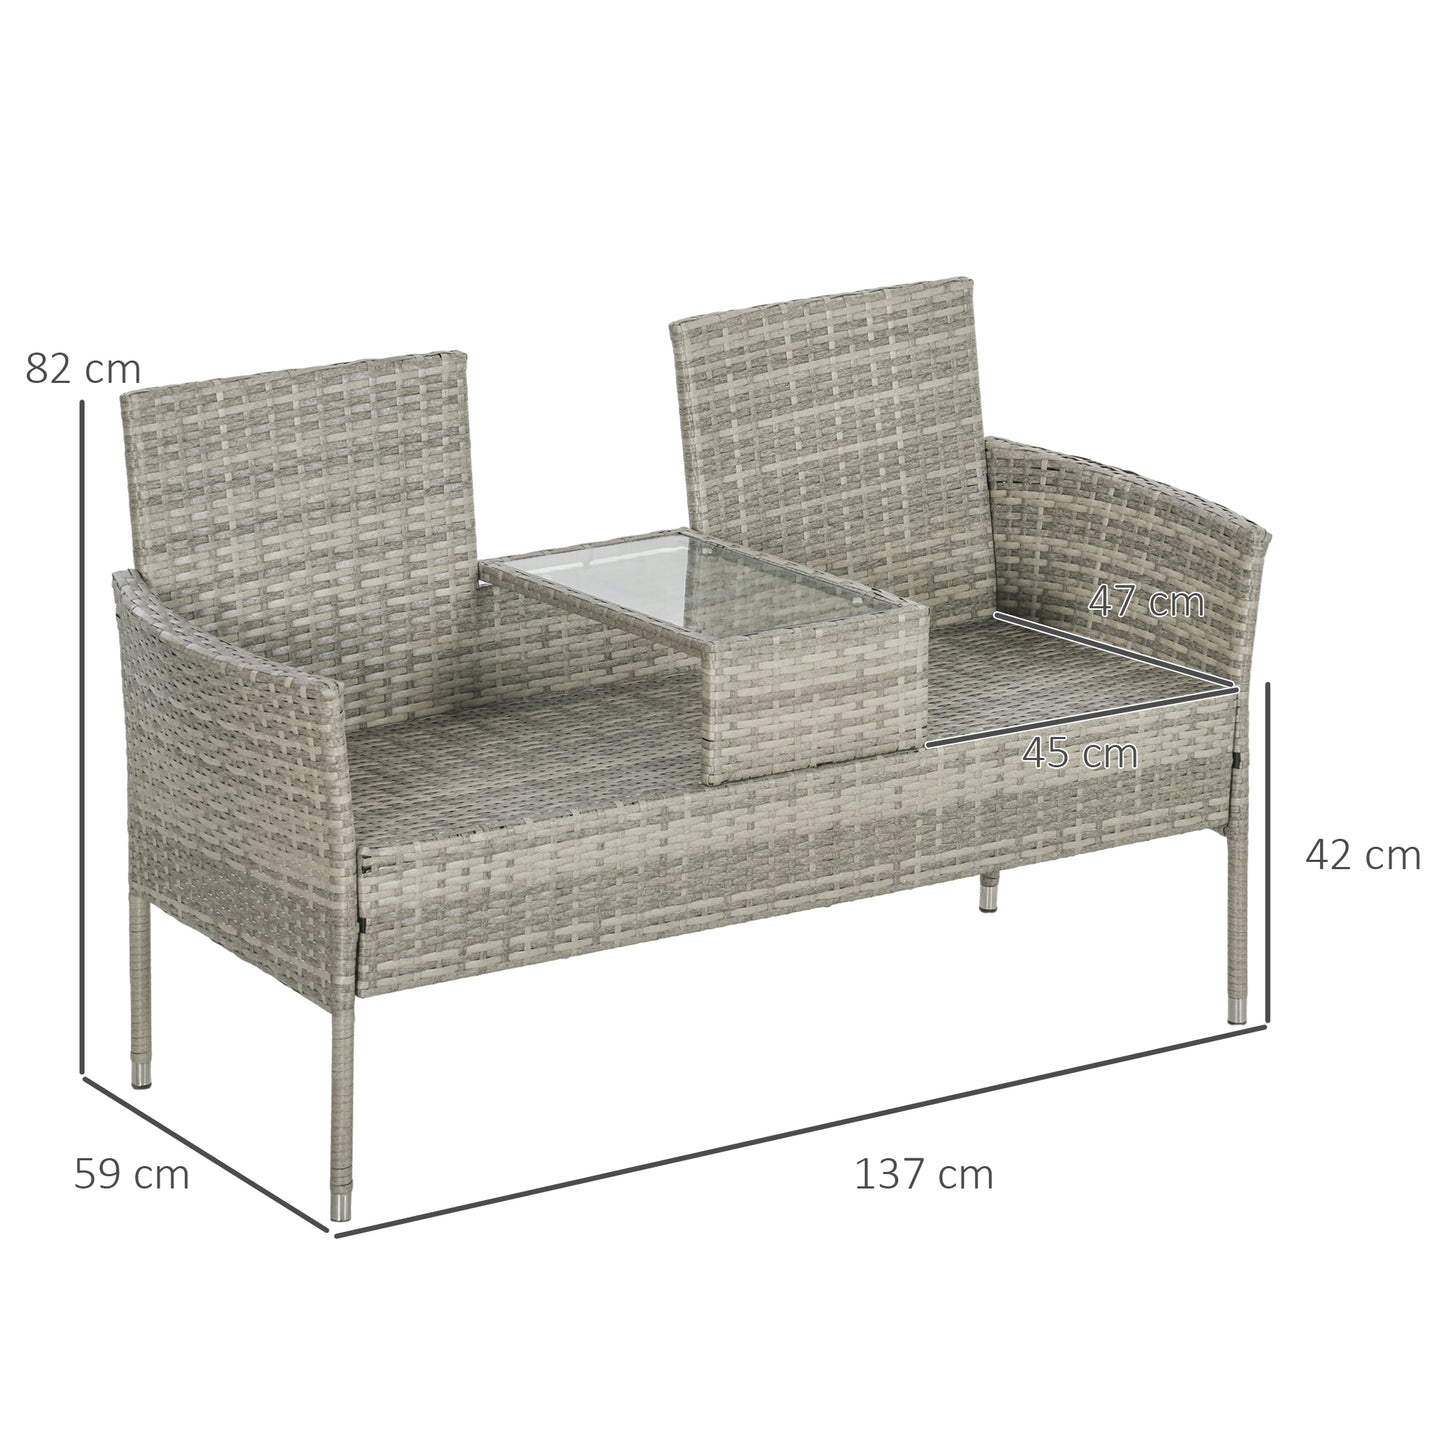 Outsunny Two-Seat Rattan Chair, with Middle Table - Grey